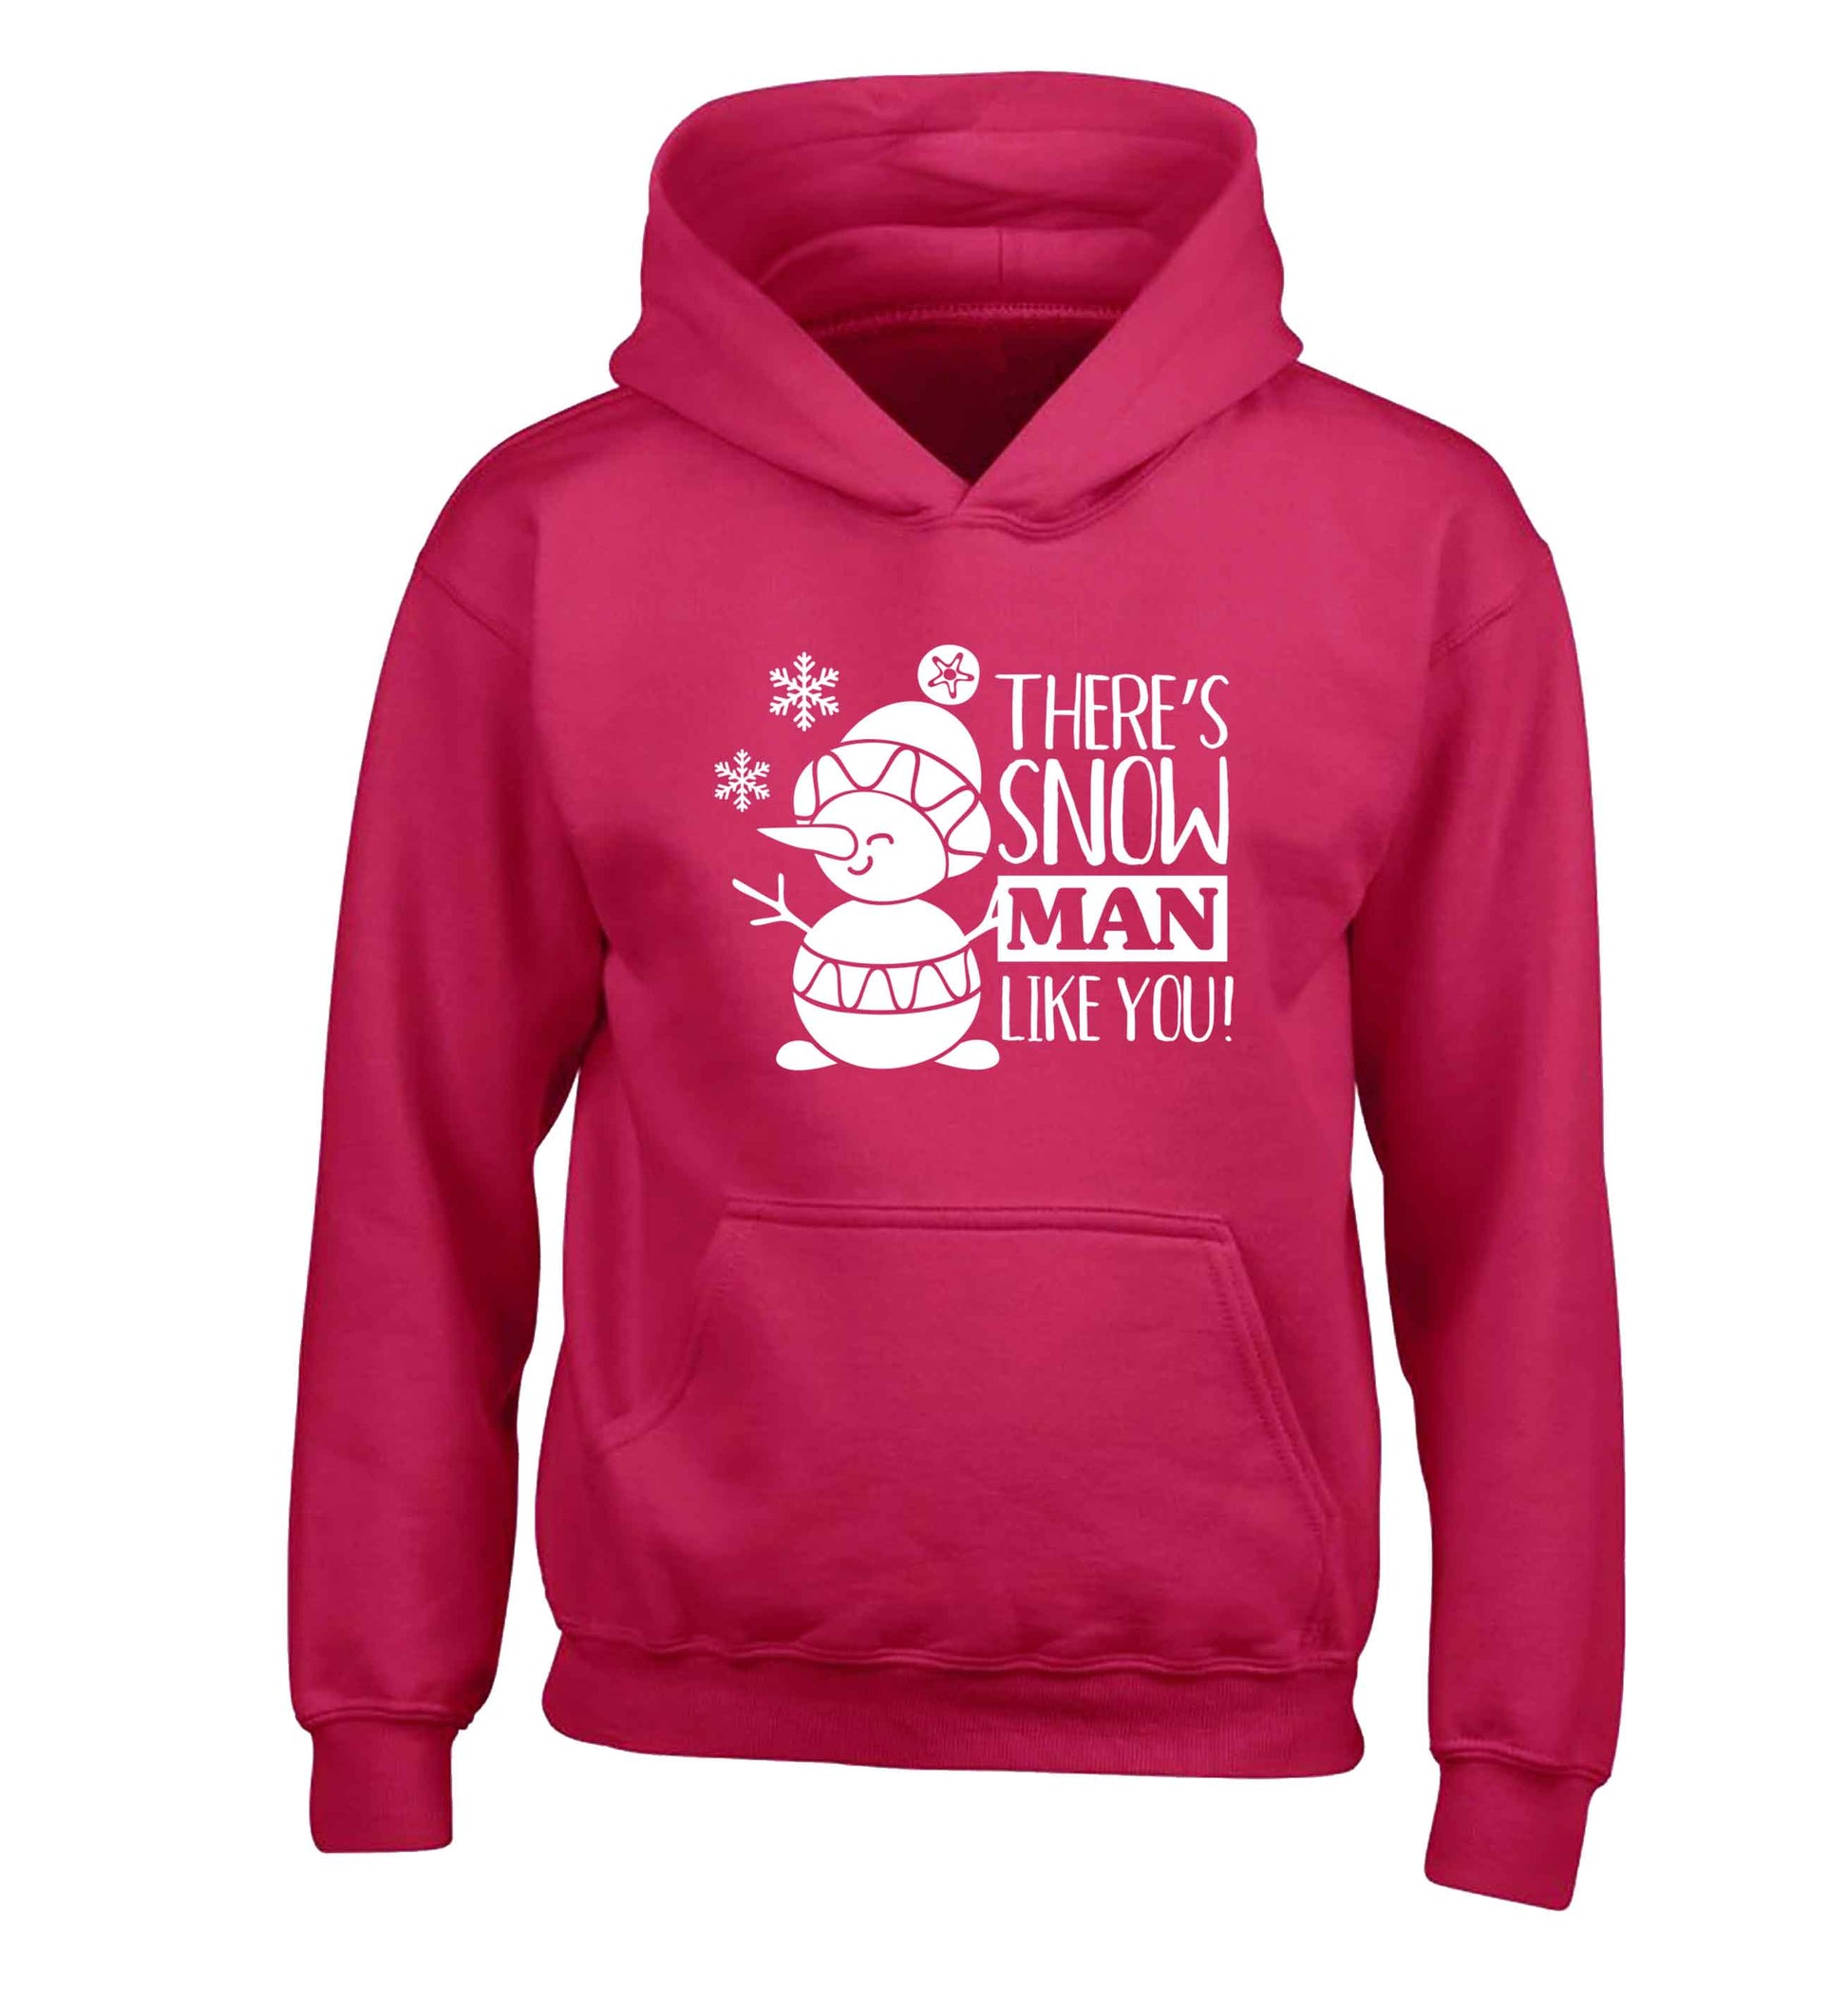 There's snow man like you children's pink hoodie 12-13 Years